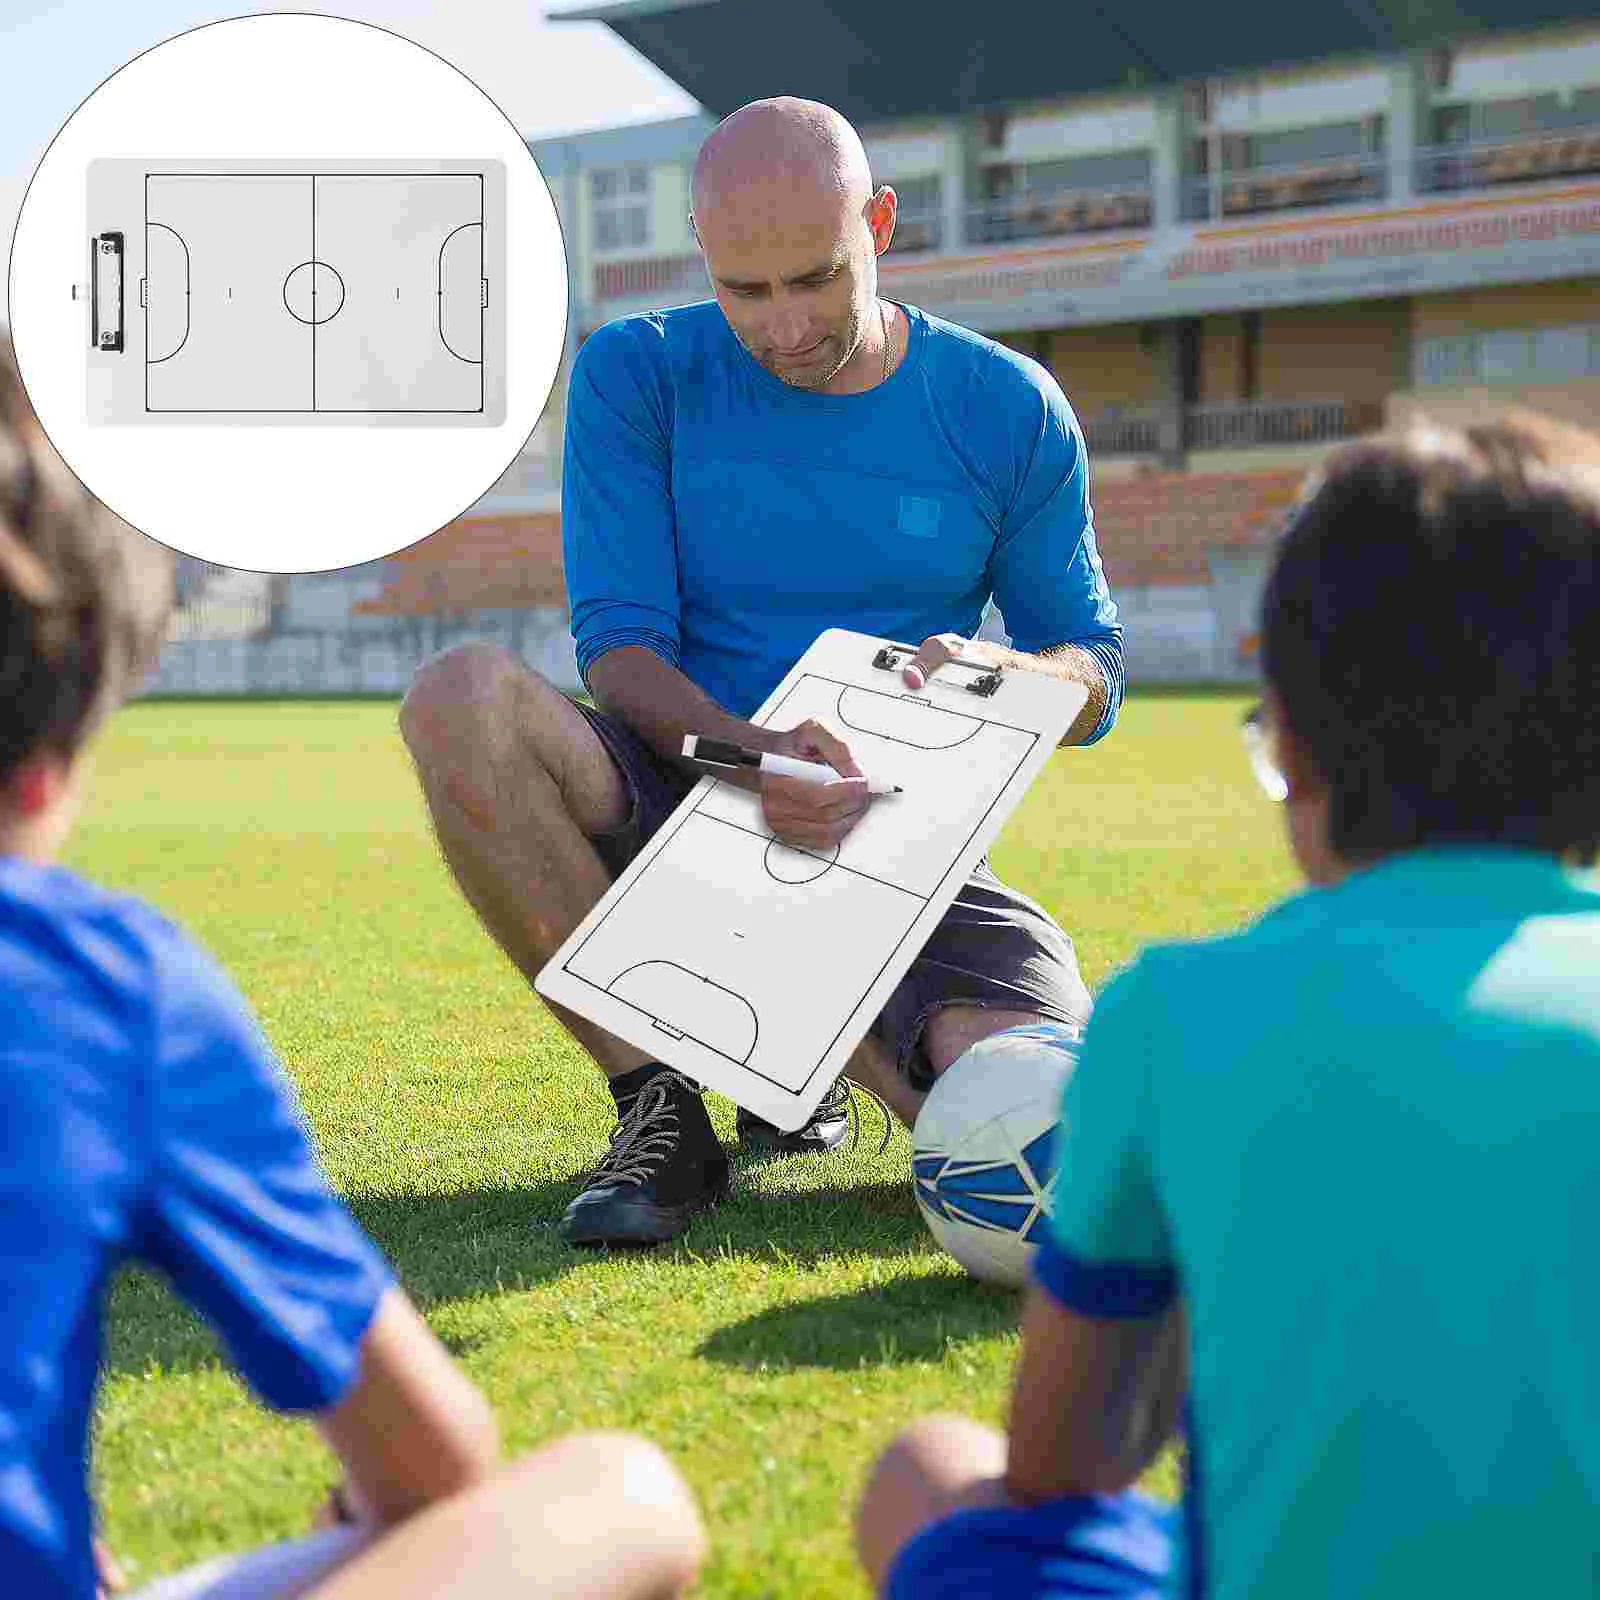 

Football Board Planning Coaches Board Soccer Field White Board Useful Coaches for Game Pvc Competition